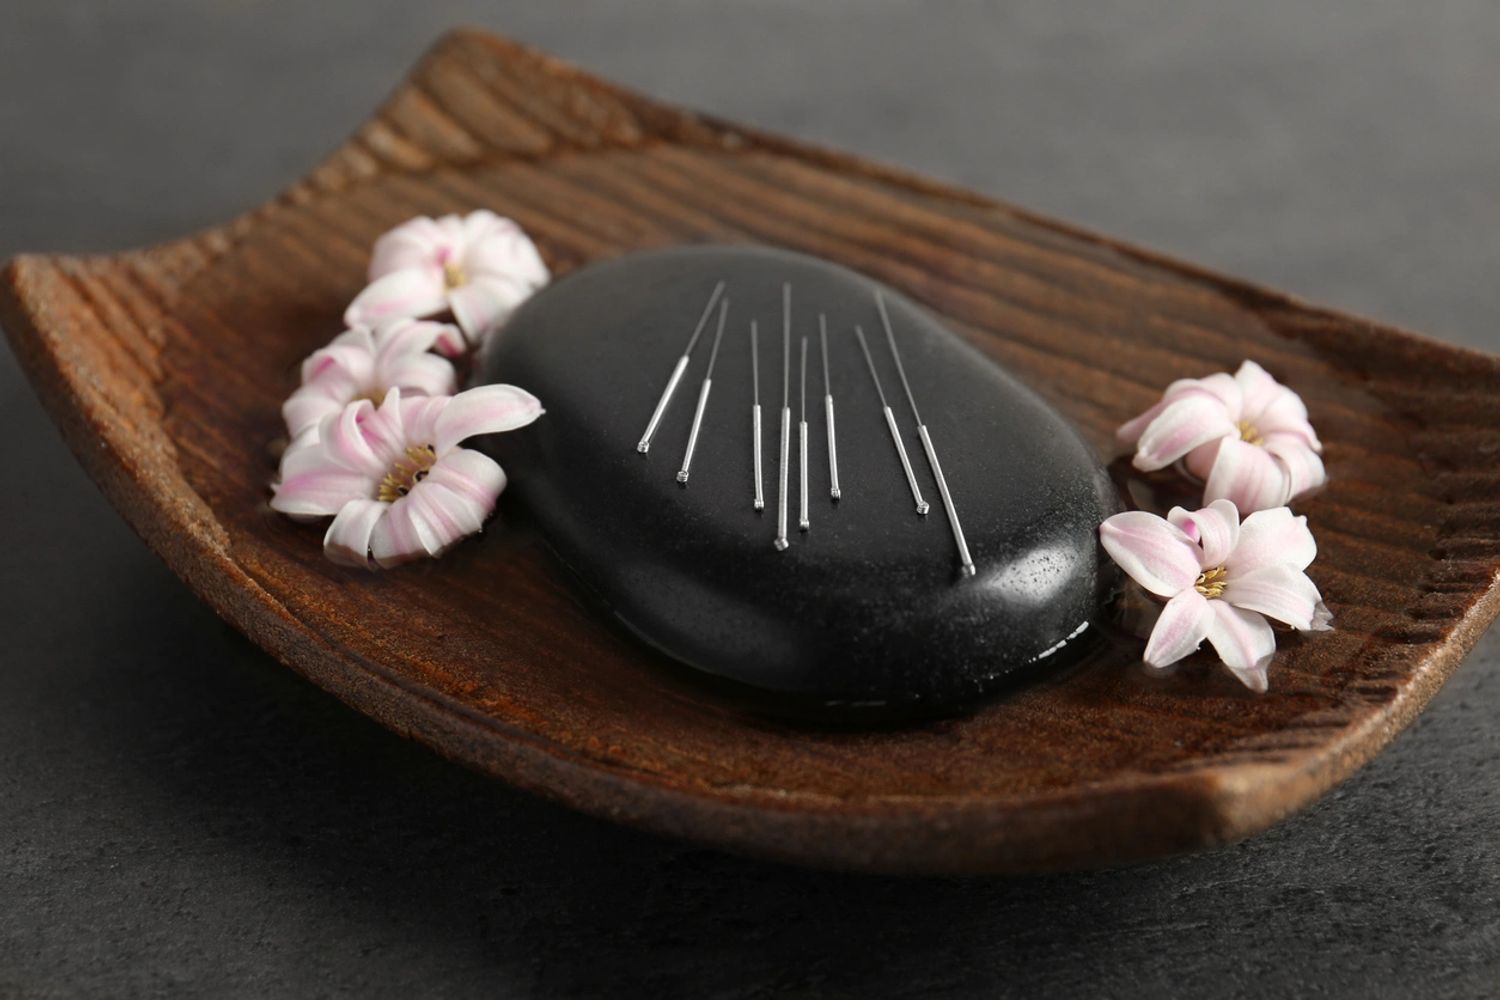 Stone with acupuncture needles on it and pink blossoms on a wood dish.